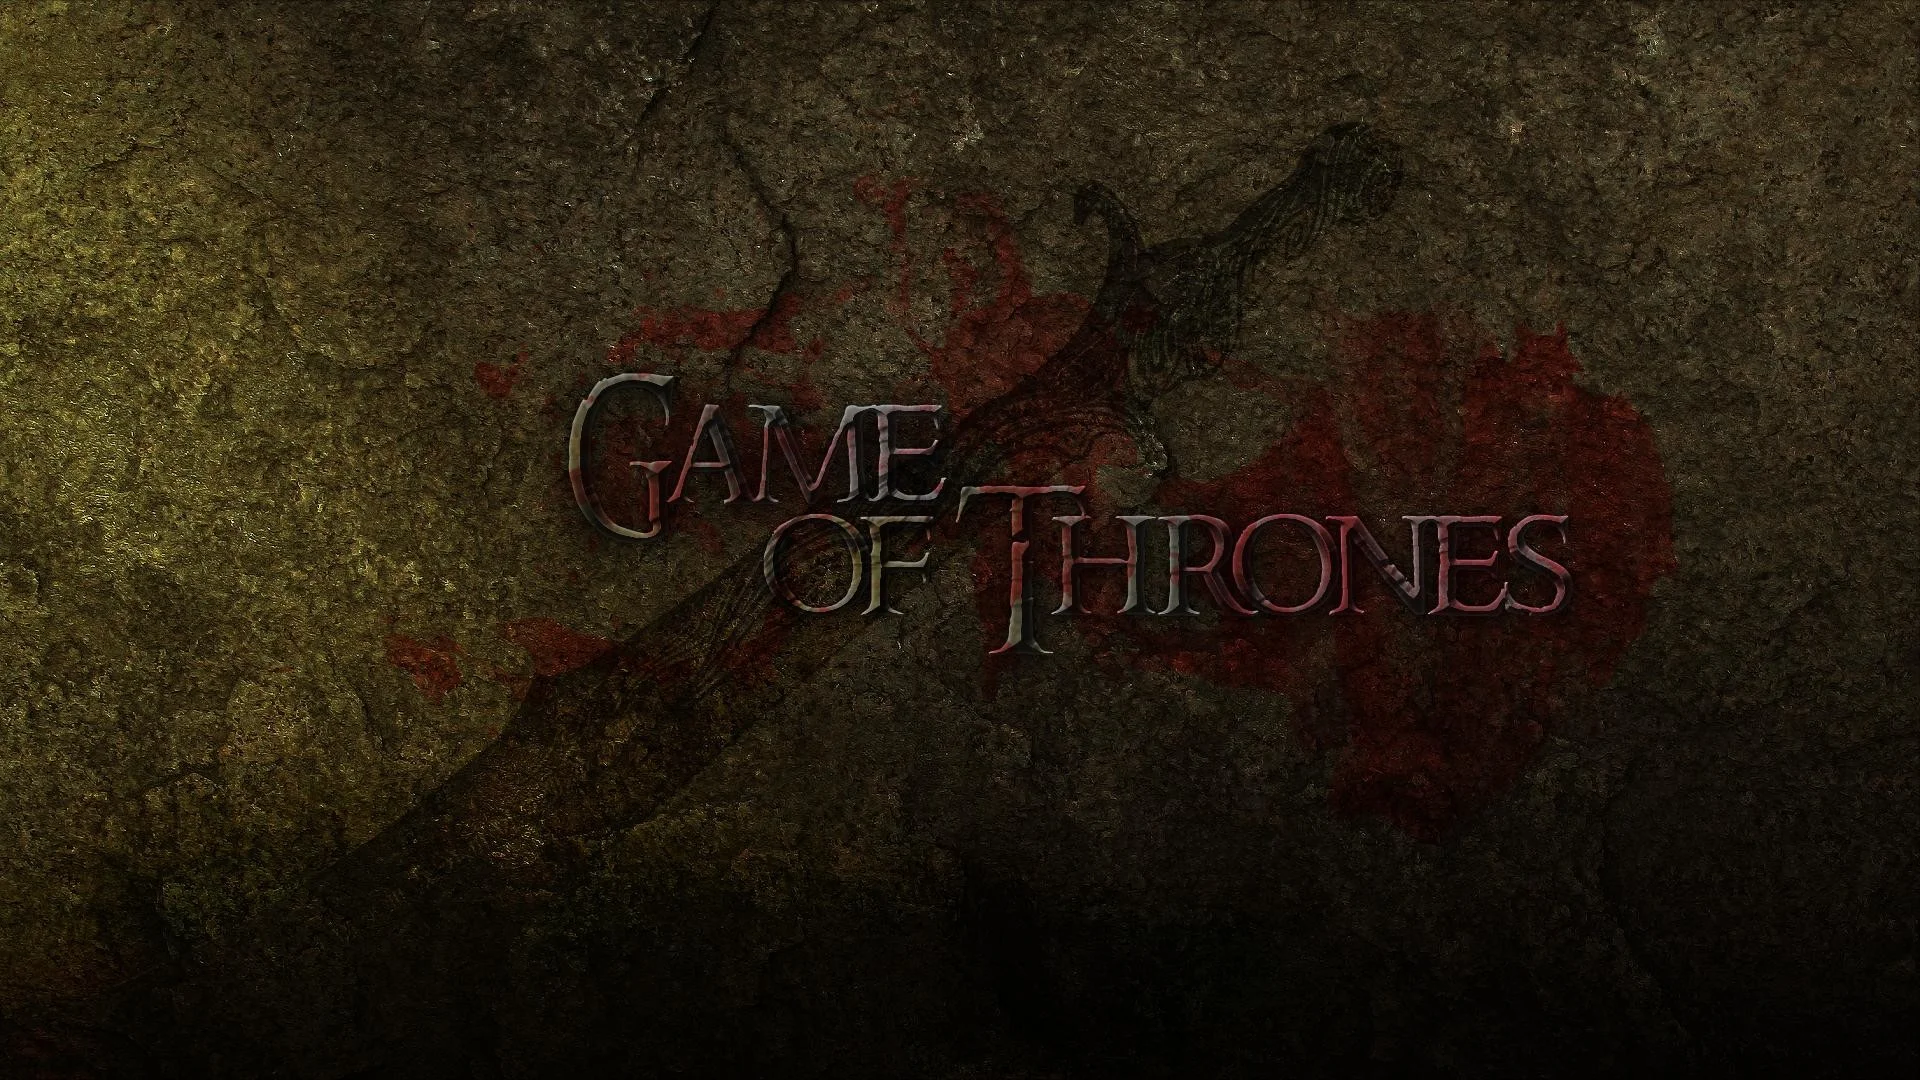 Movies 10801 1920x game thrones background